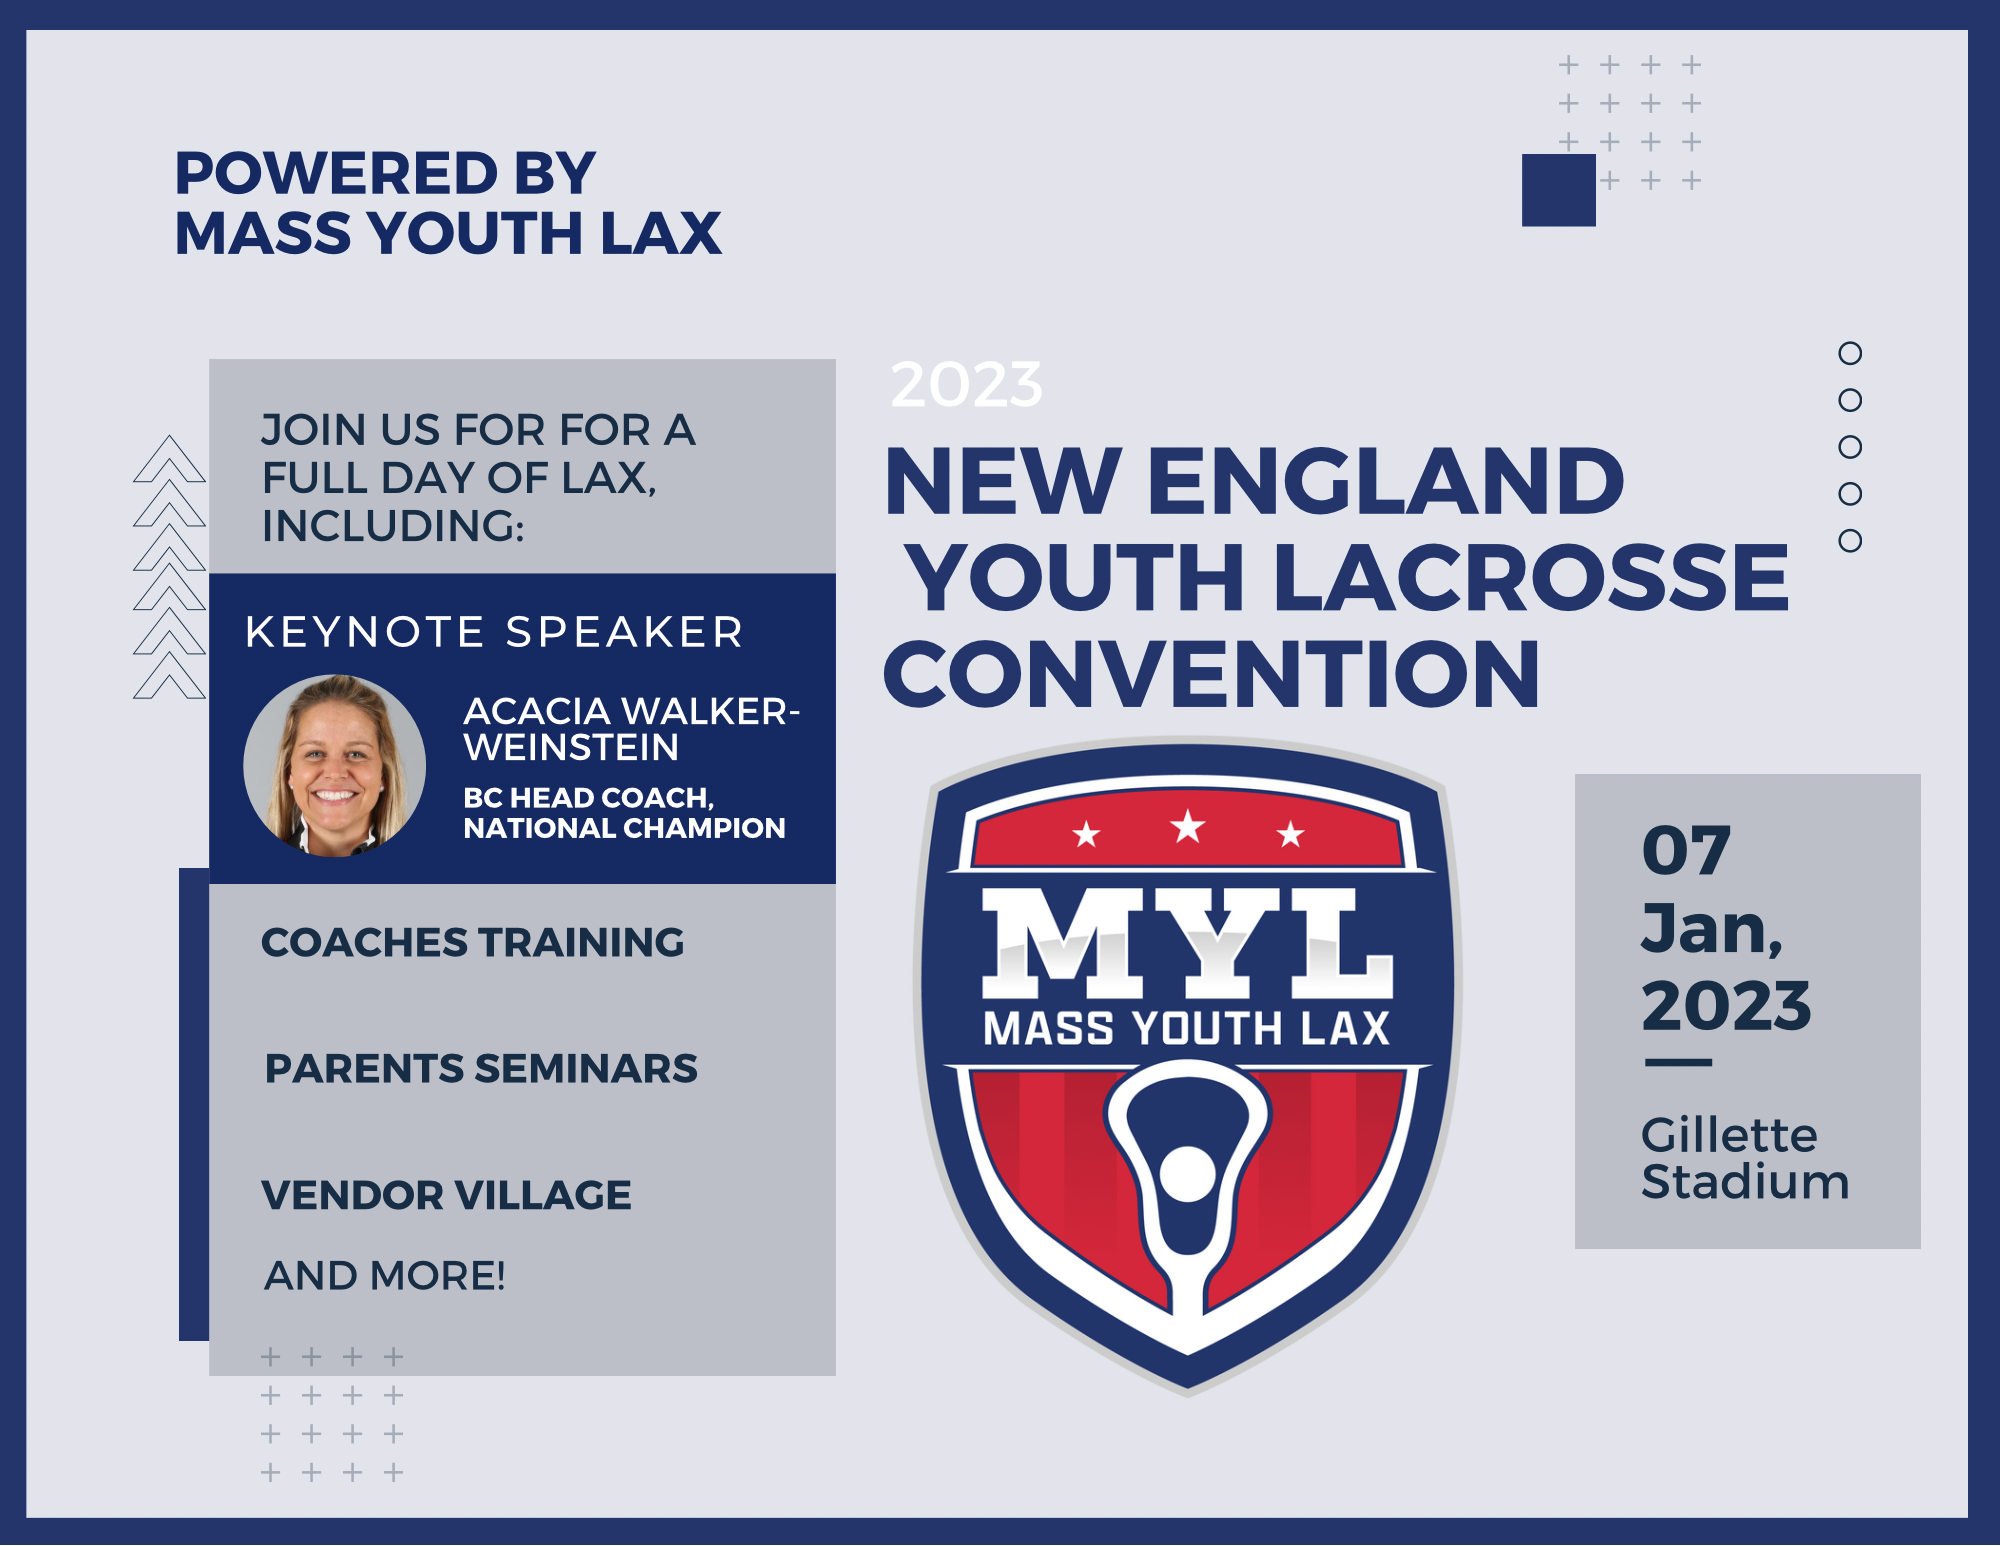 New England Youth Lacrosse Convention powered by Mass Youth Lacrosse